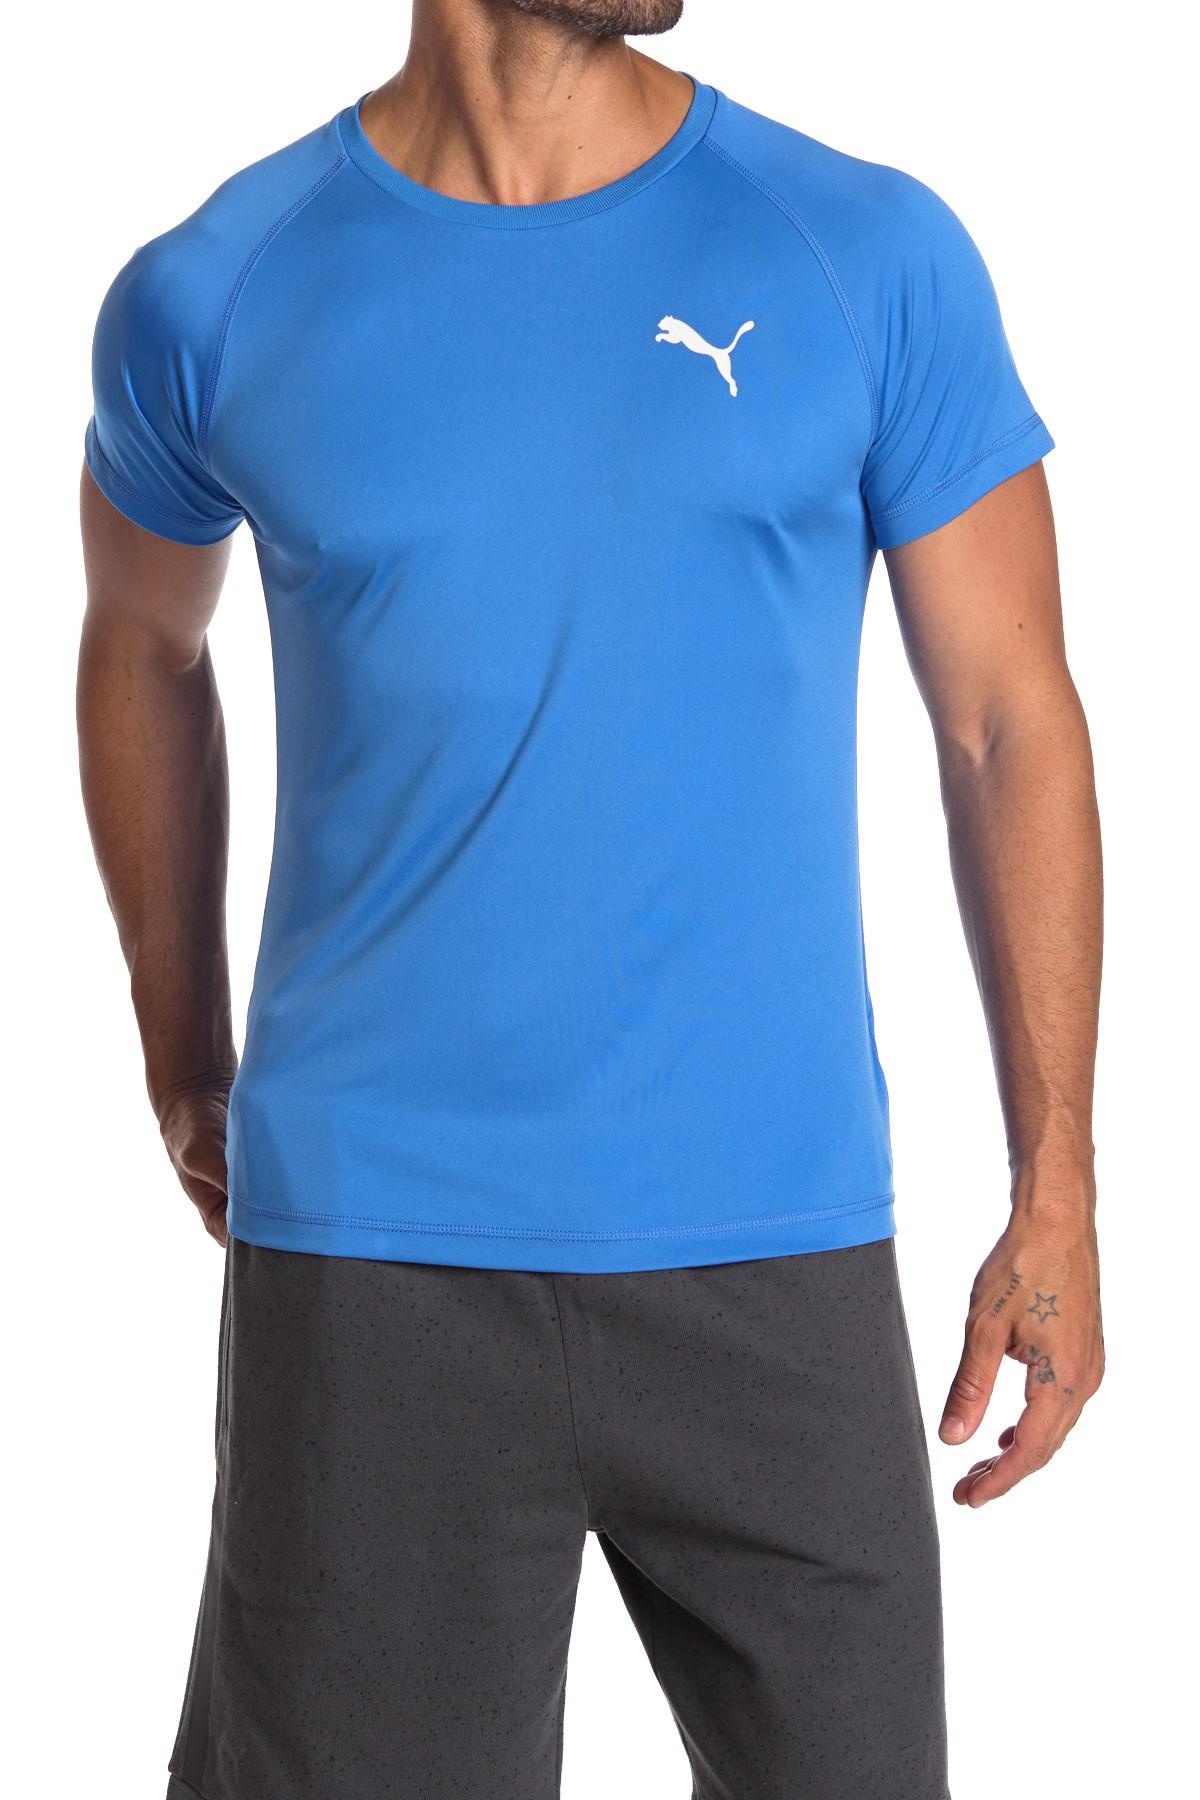 PUMA Synthetic Ready To Go Mesh Panel Raglan T-shirt in Blue for Men - Lyst